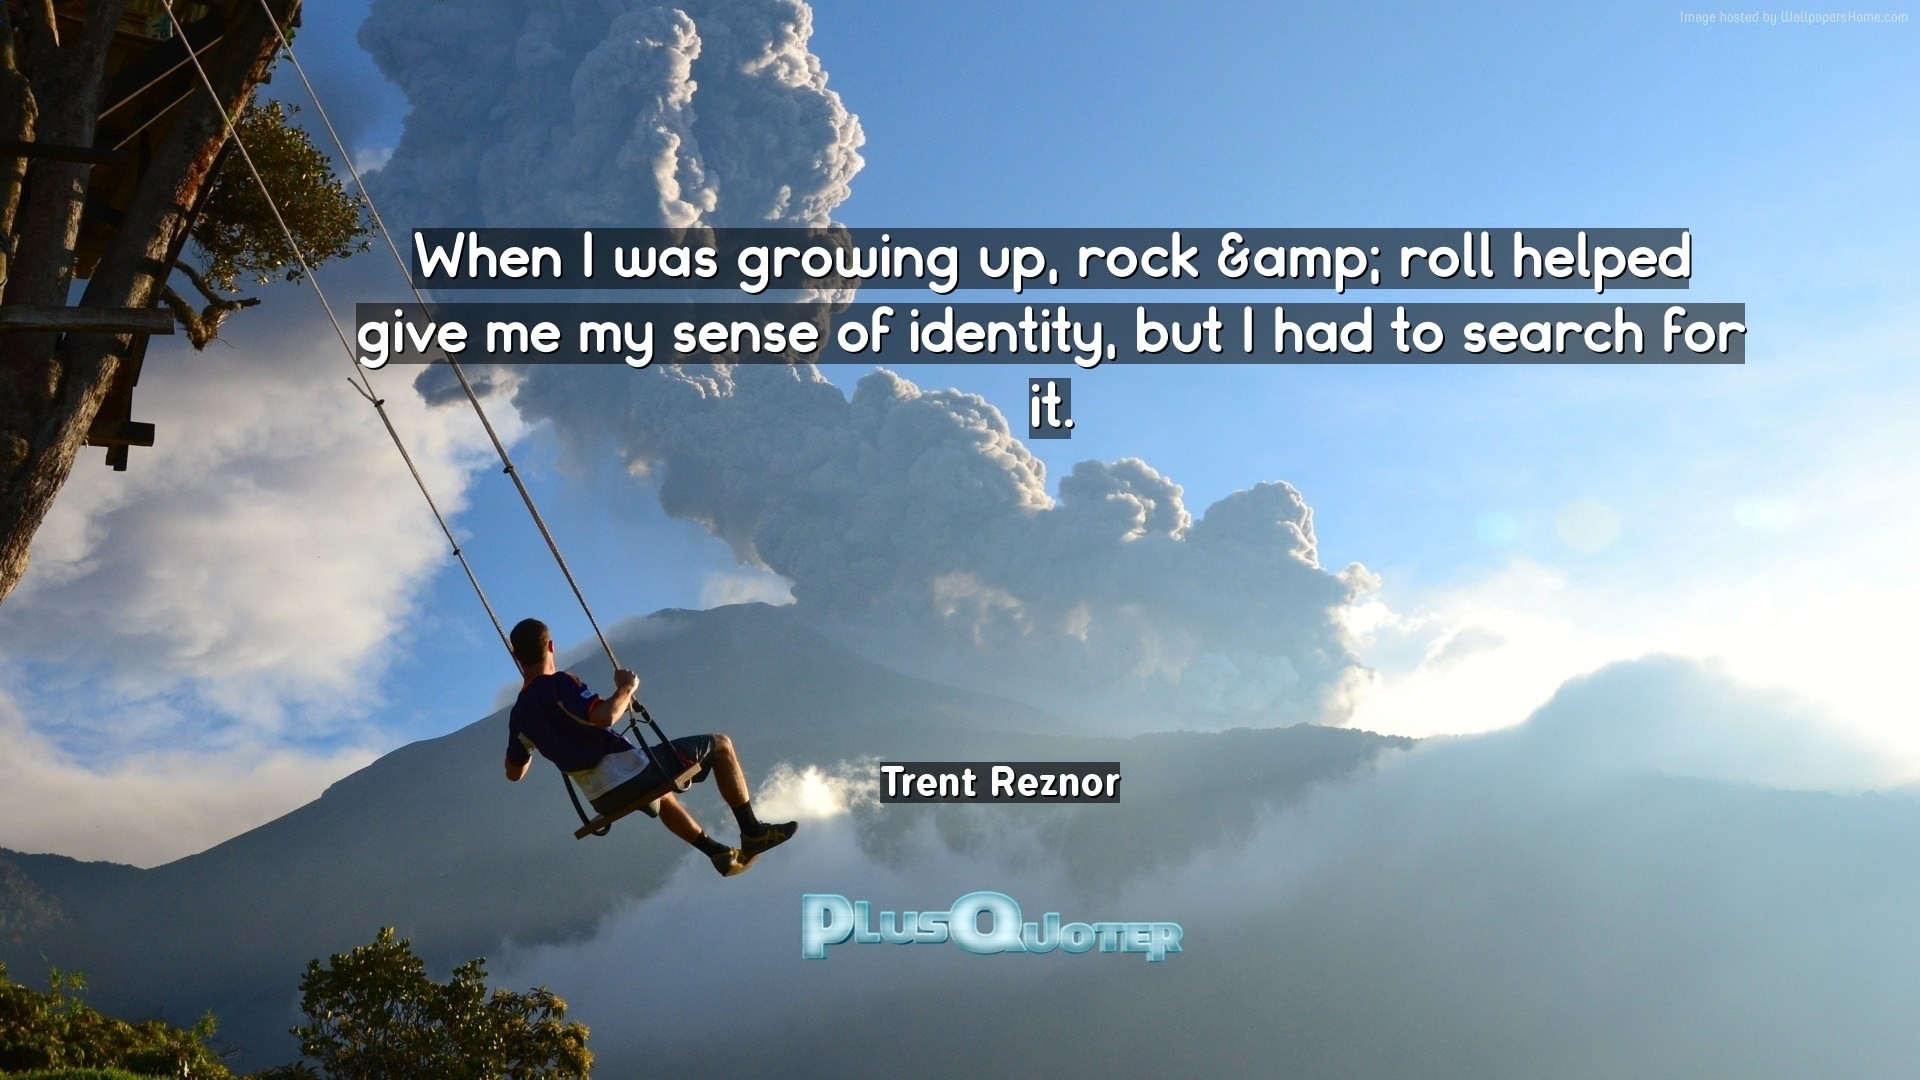 1920x1080 Download Wallpaper with inspirational Quotes- "When I was growing up, rock  & roll